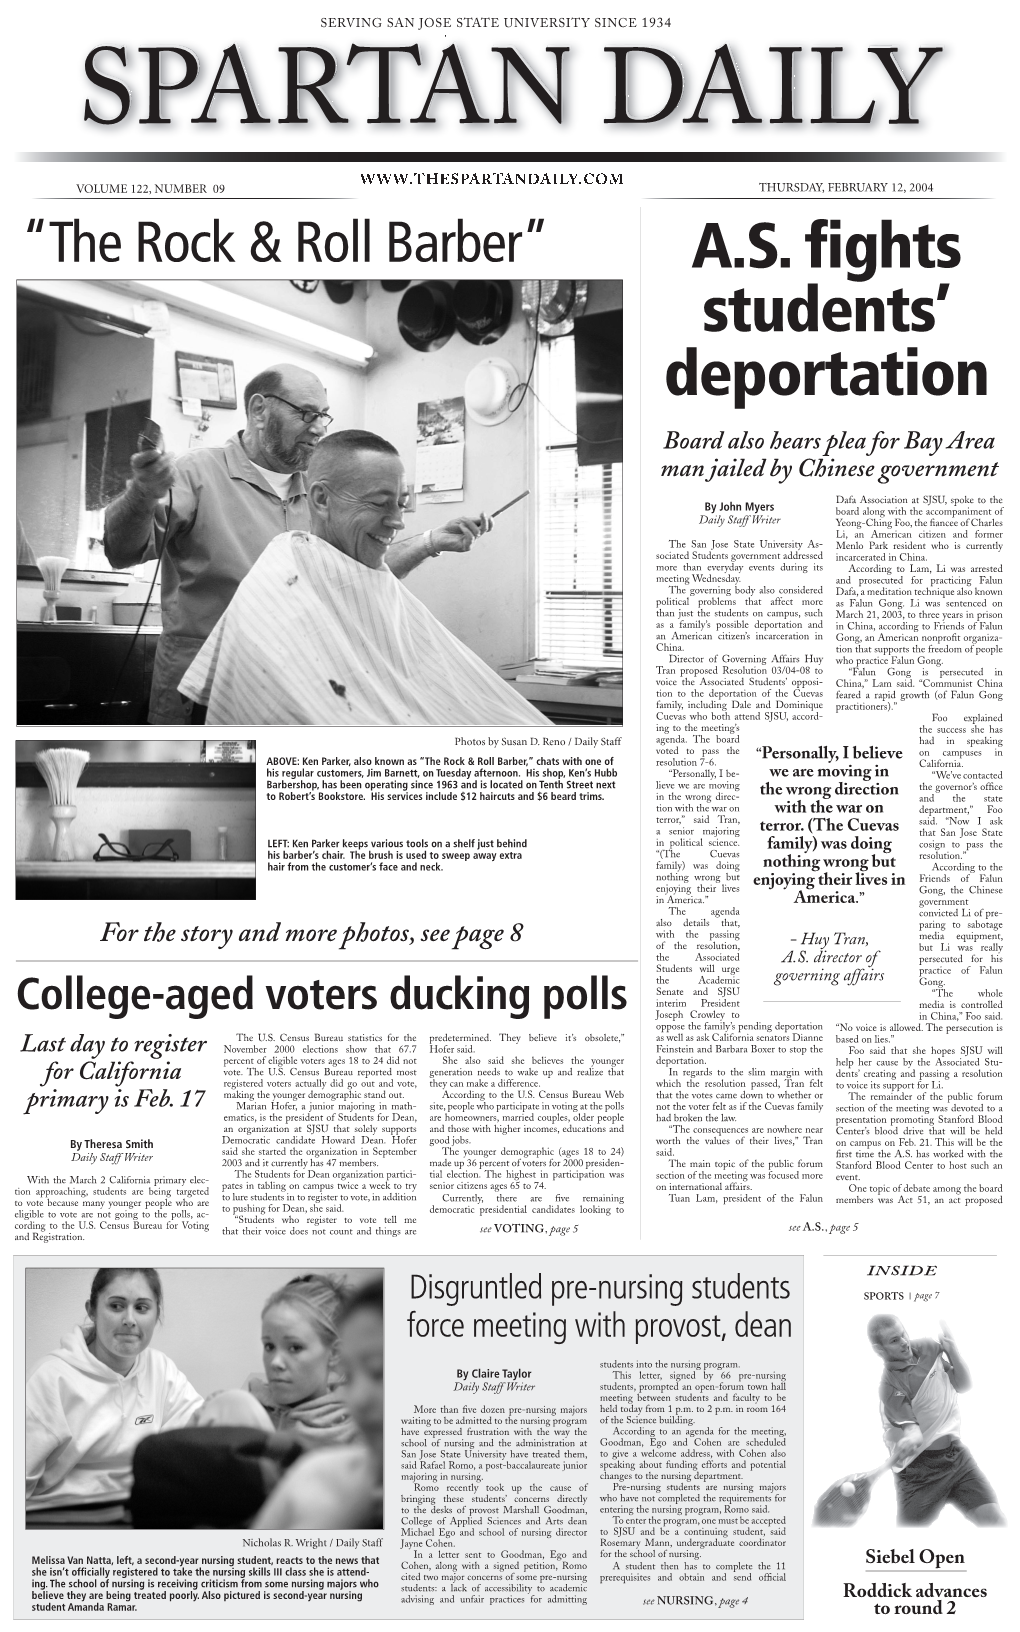 A.S. Fights Students' Deportation